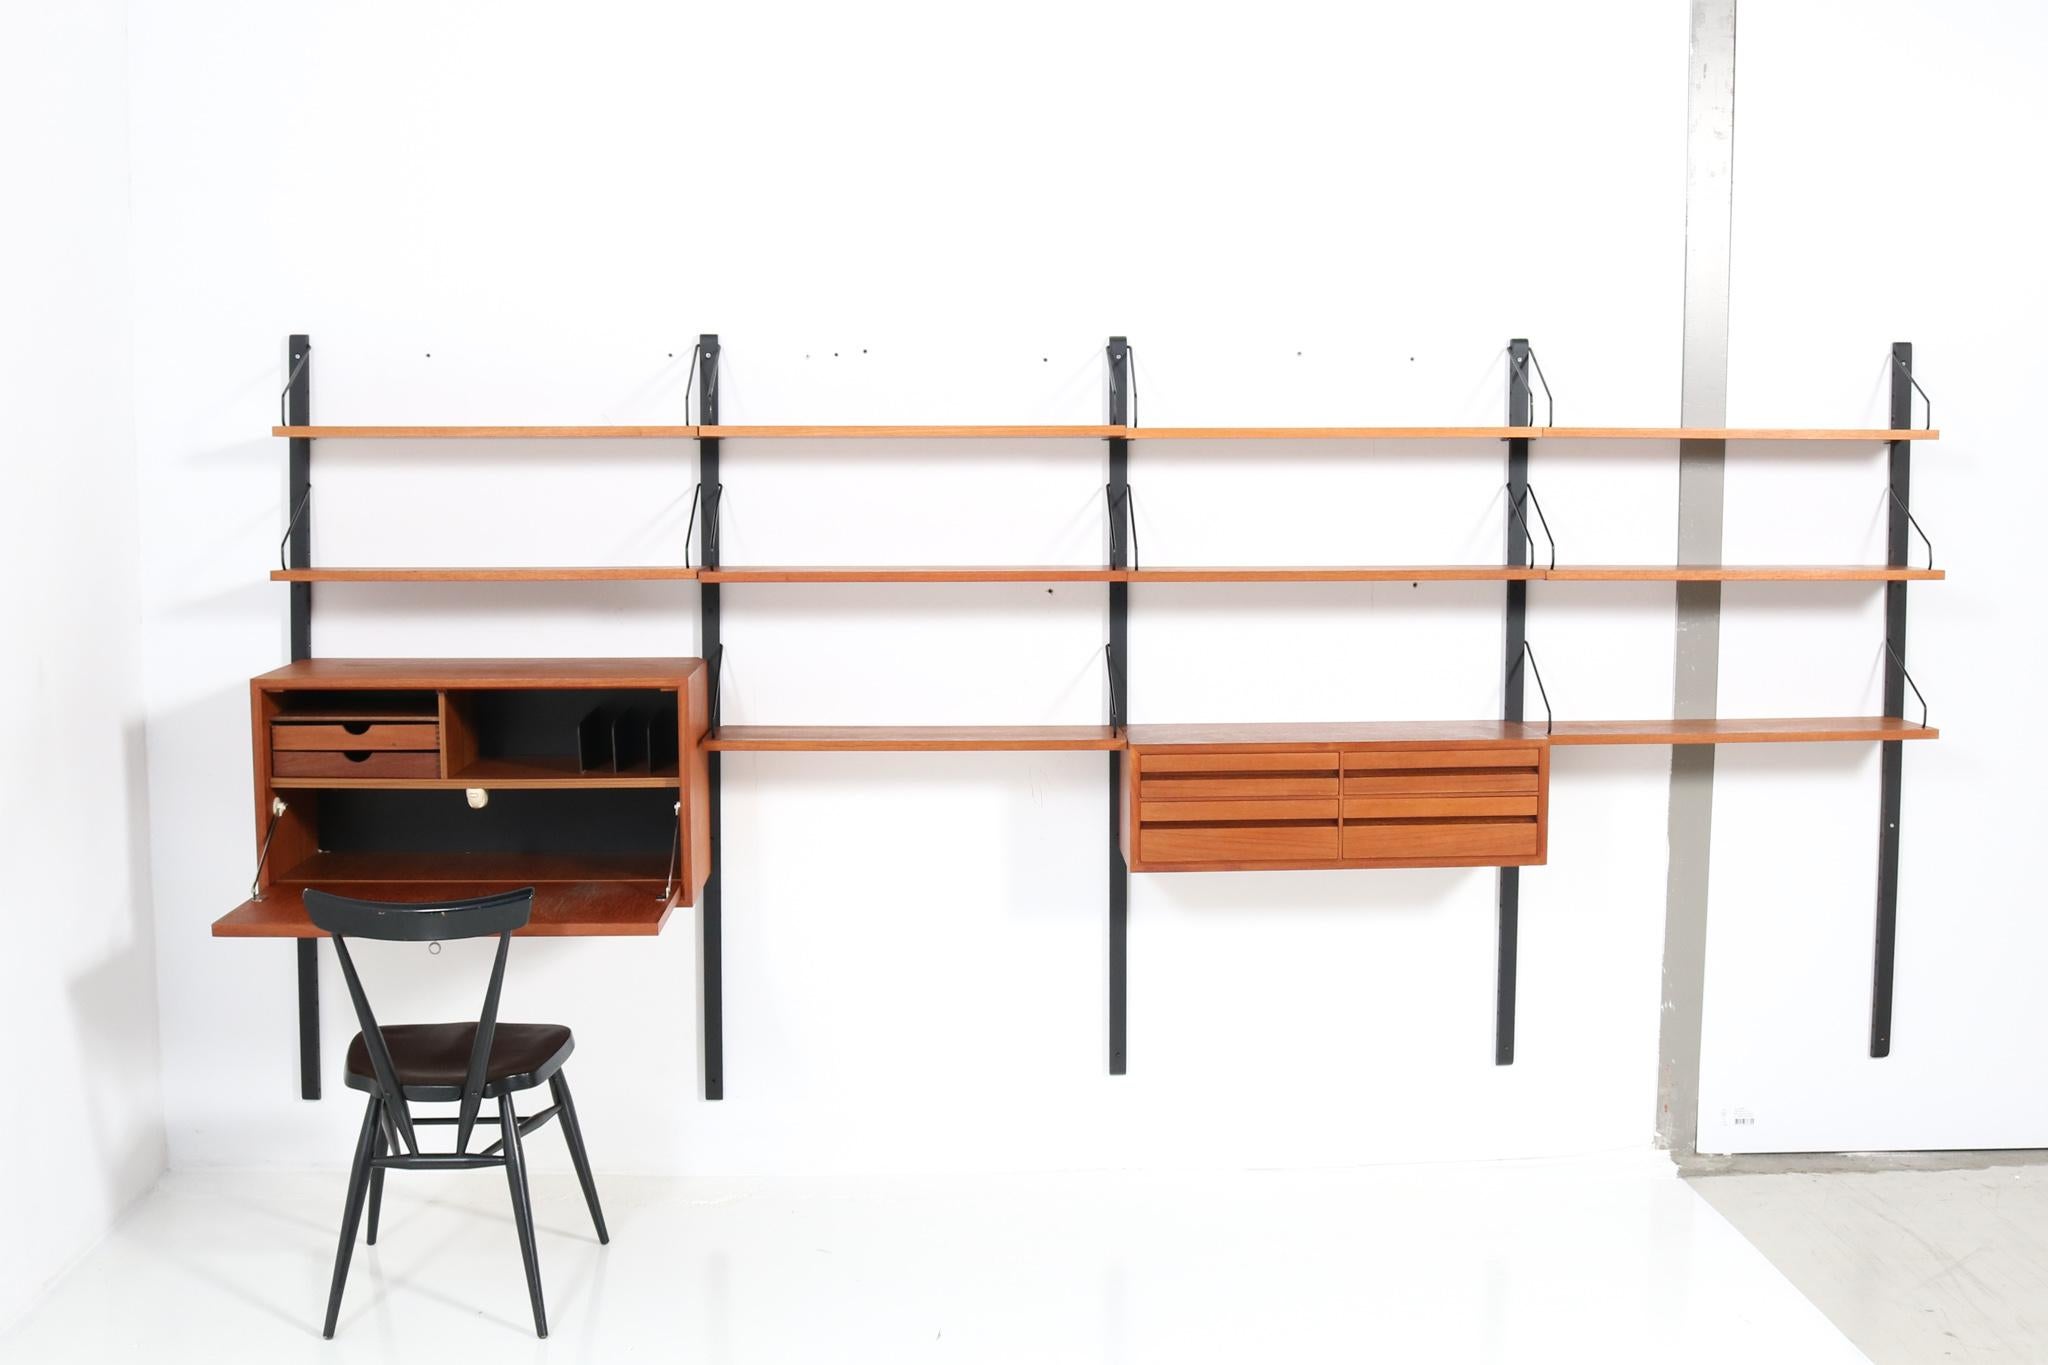 Funky Mid-Century Modern Royal modular wall unit.
Design by Poul Cadovius for Cado.
Striking Danish design from the 1960s.
This large Mid-Century Modern Royal wall unit consists of:
Five black lacquered wooden uprights H: 148 cm or 58.27